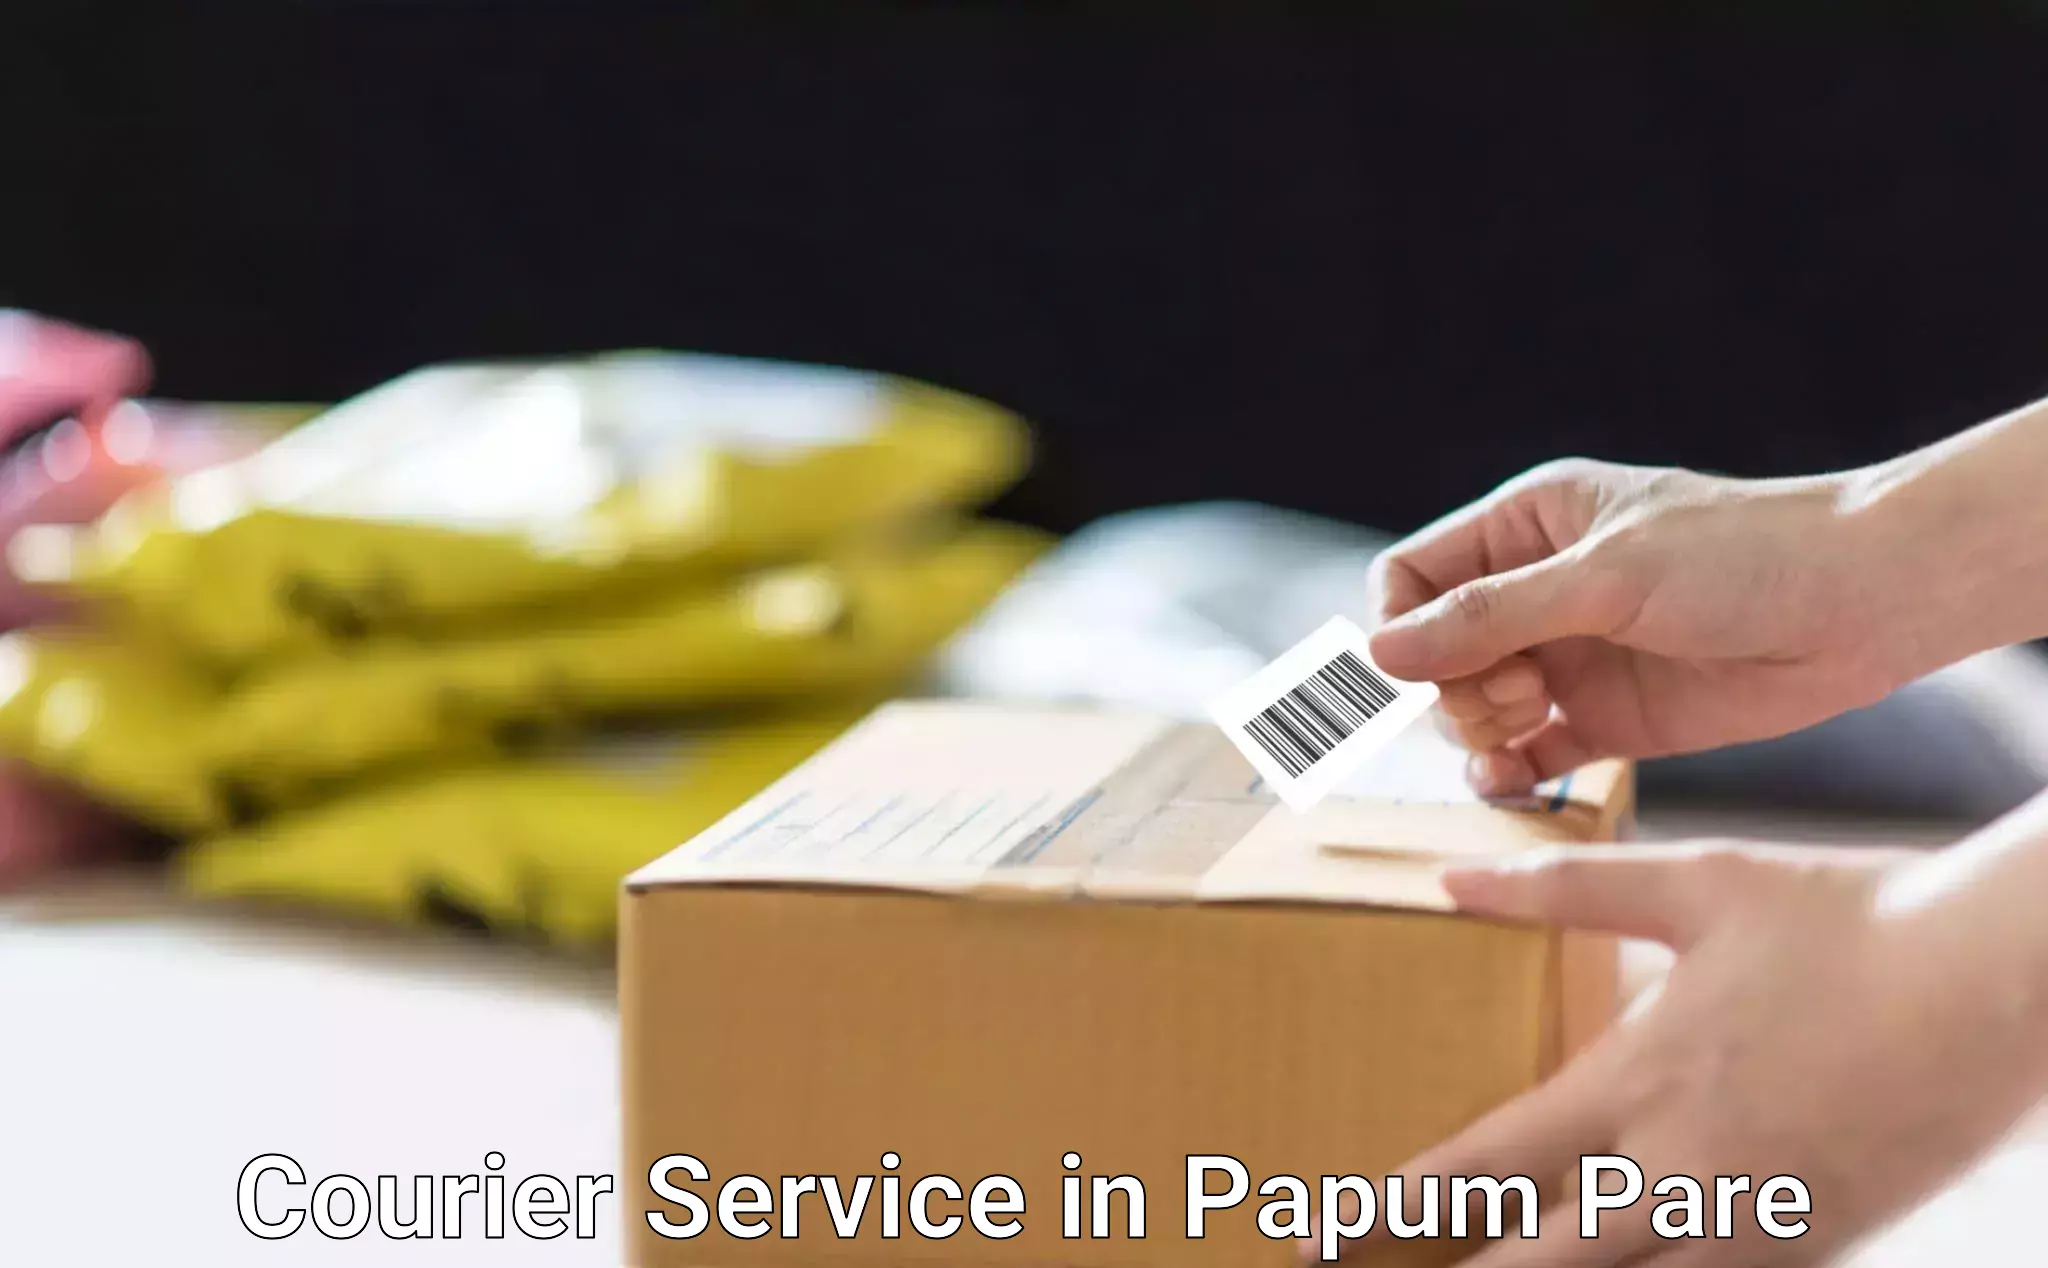 Personal courier services in Papum Pare